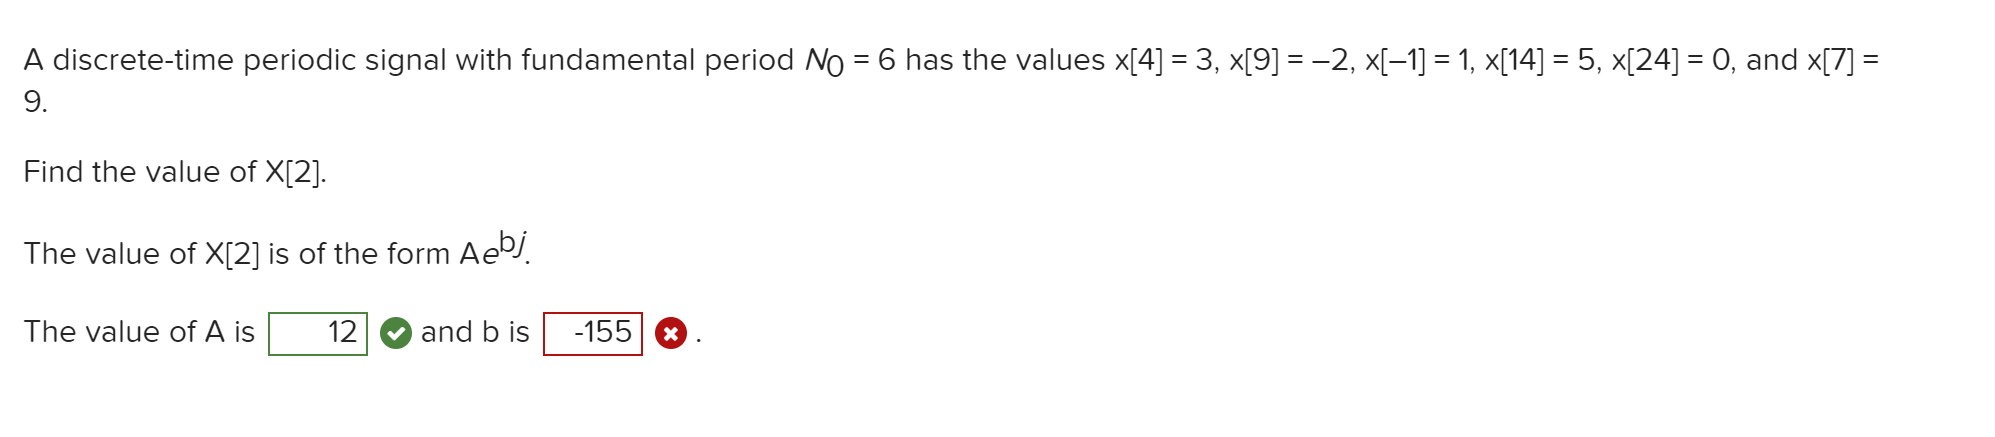 A discrete-time periodic signal with fundamental period No = 6 has the values x[4] = 3, x[9] =-2, x[-1] = 1, x[14] = 5, x[24] = 0, and x[7] =
9.
%3D
Find the value of X[2].
The value of X[2] is of the form Ae.
The value of A is
12
and b is
-155
